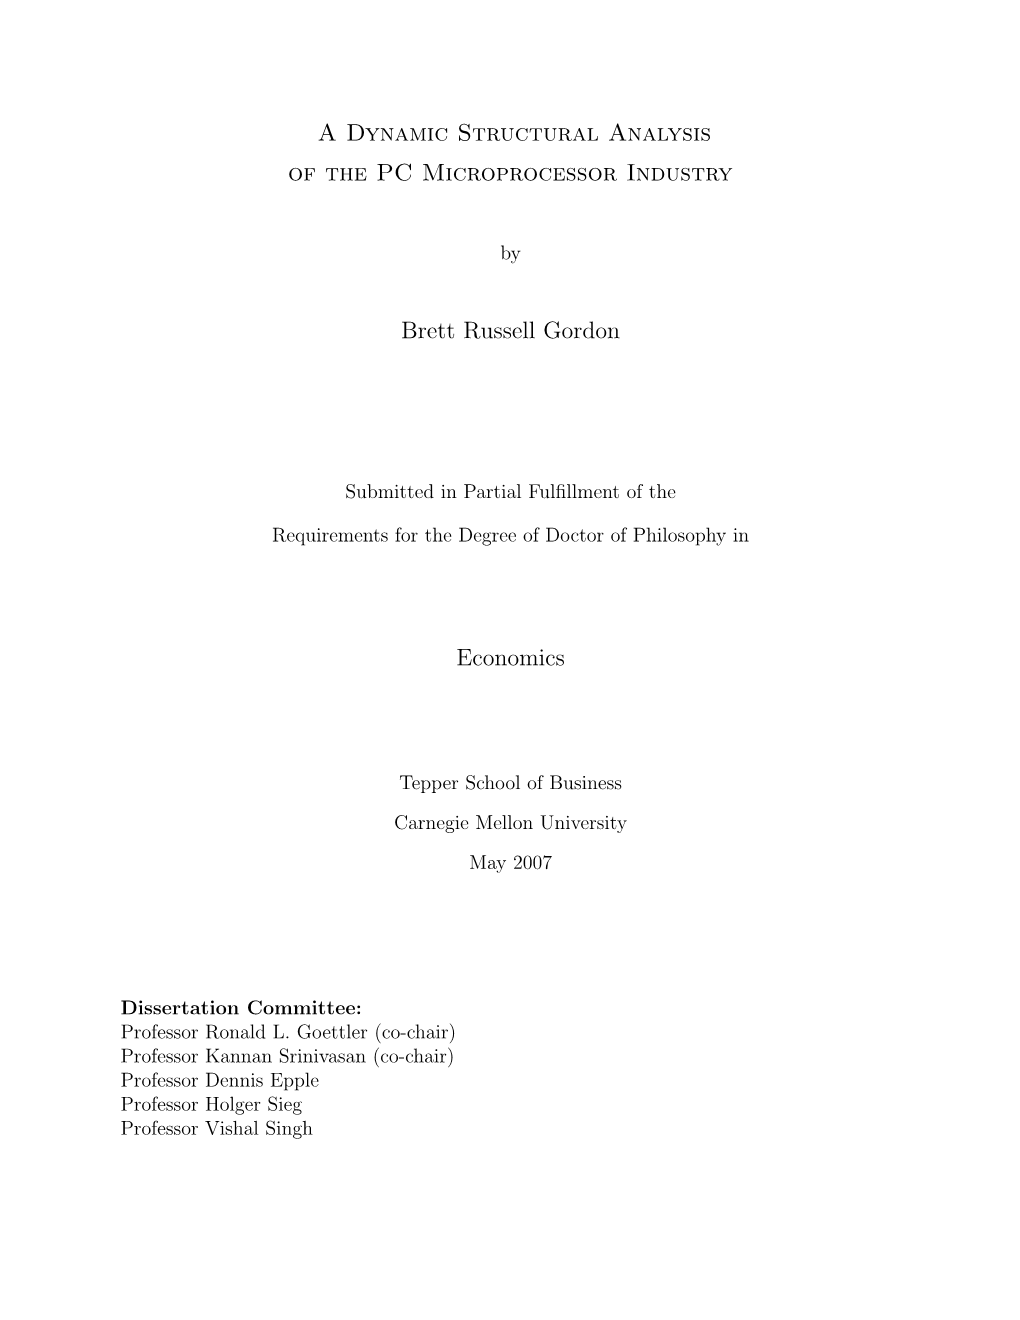 A Dynamic Structural Analysis of the PC Microprocessor Industry